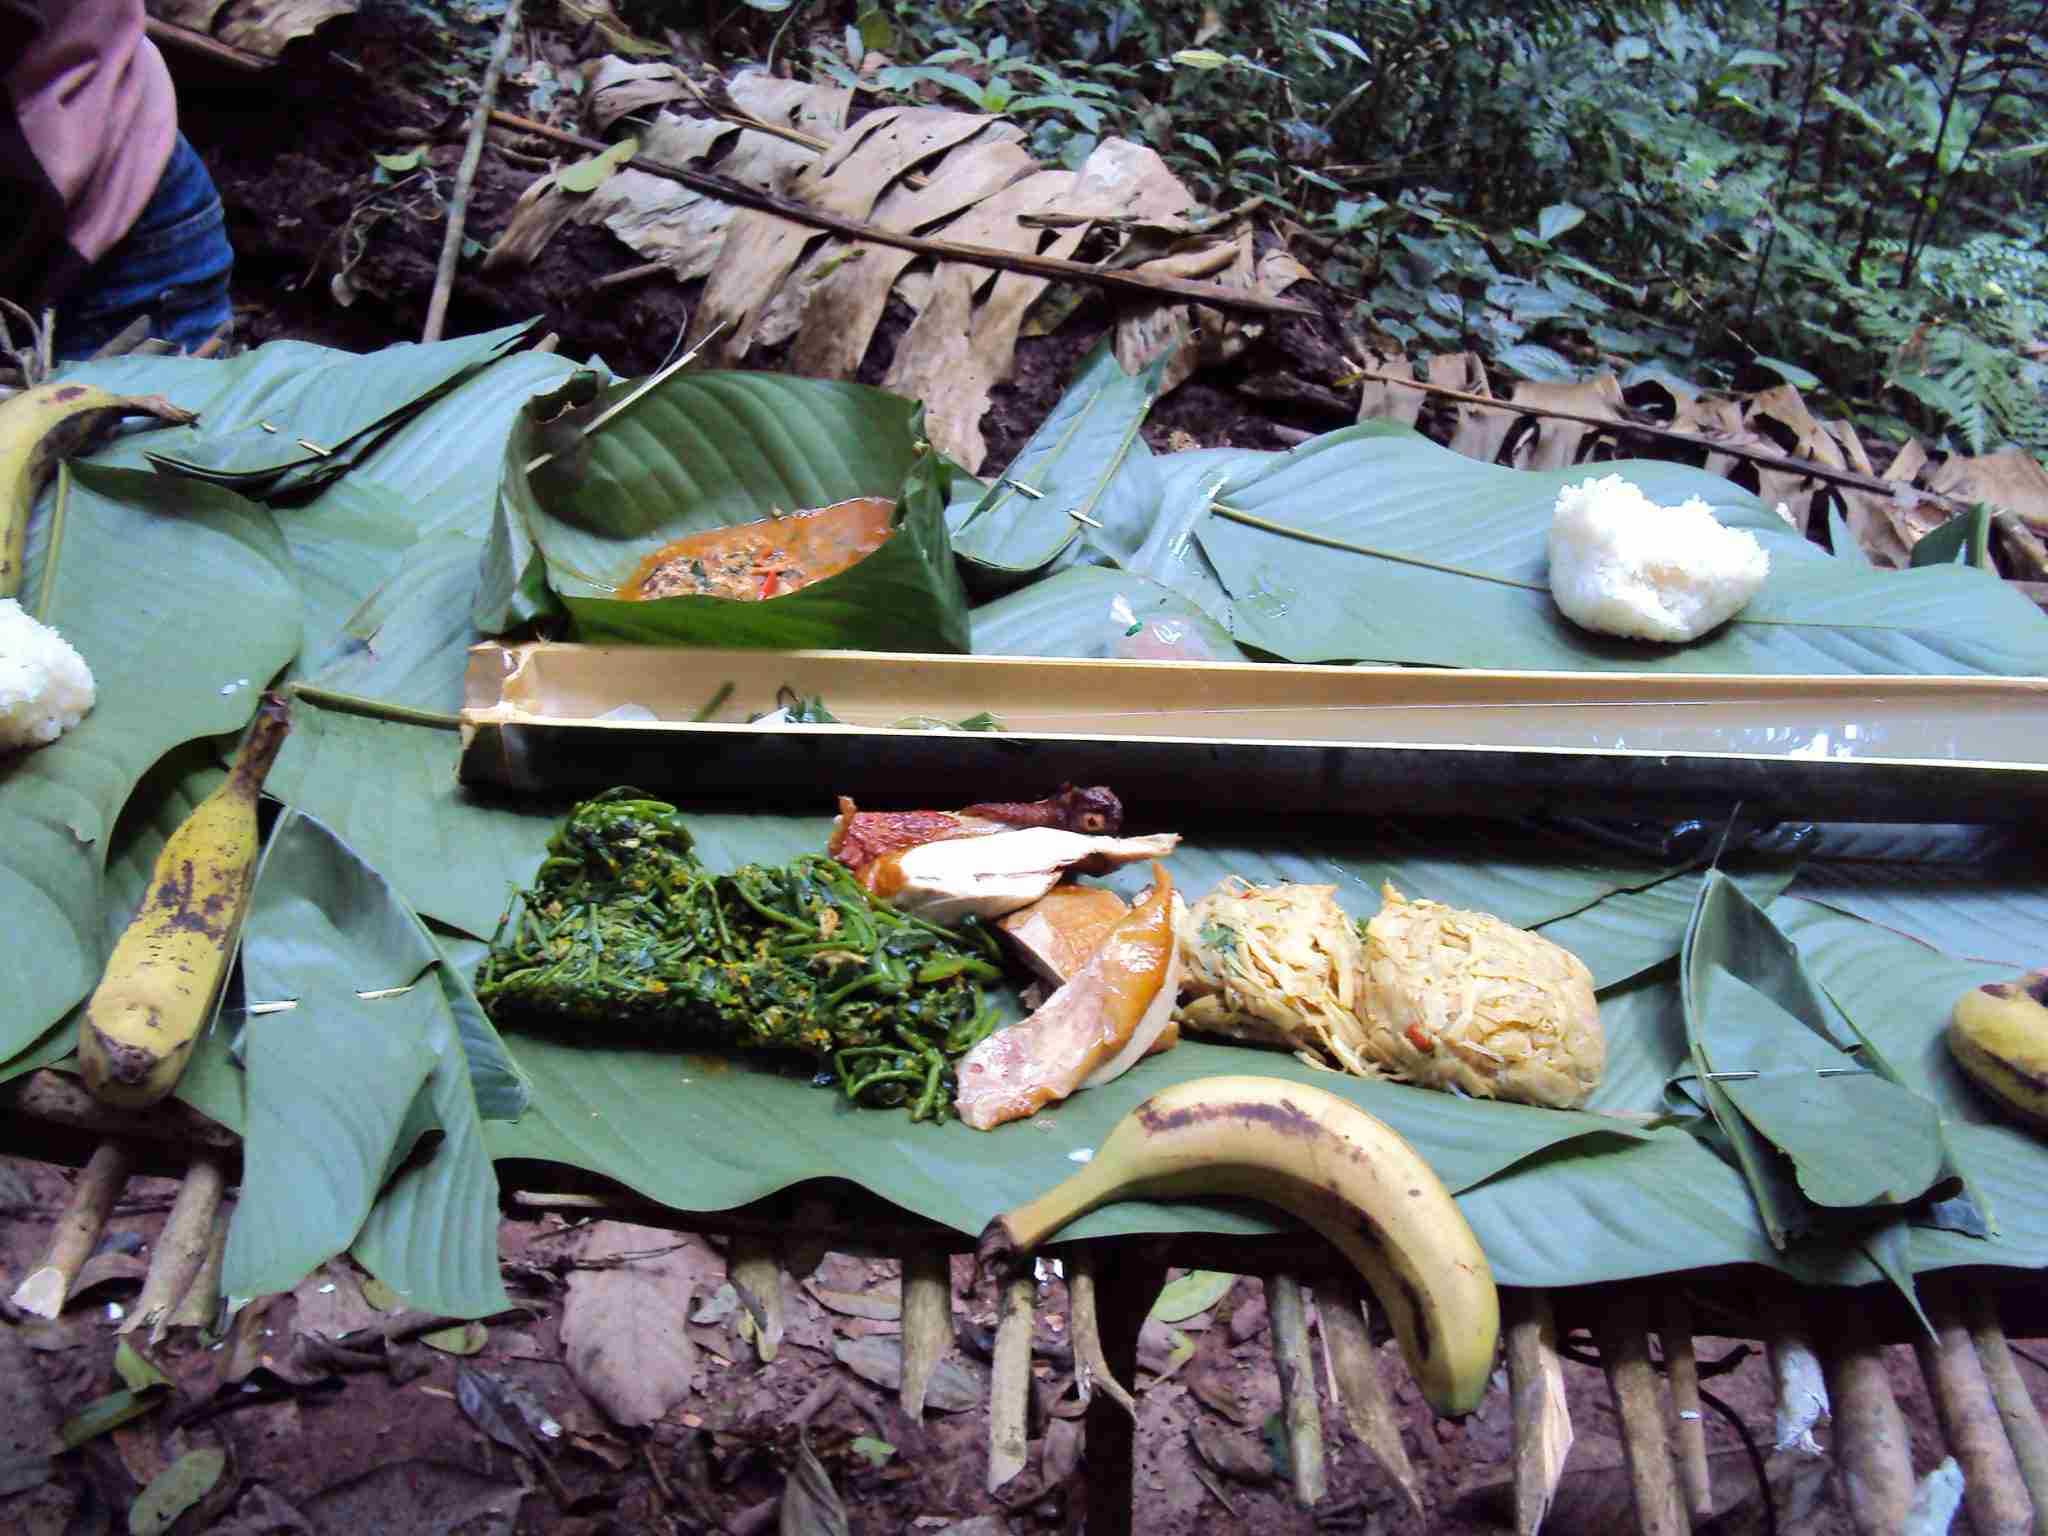 Lunch in the jungle - delicious